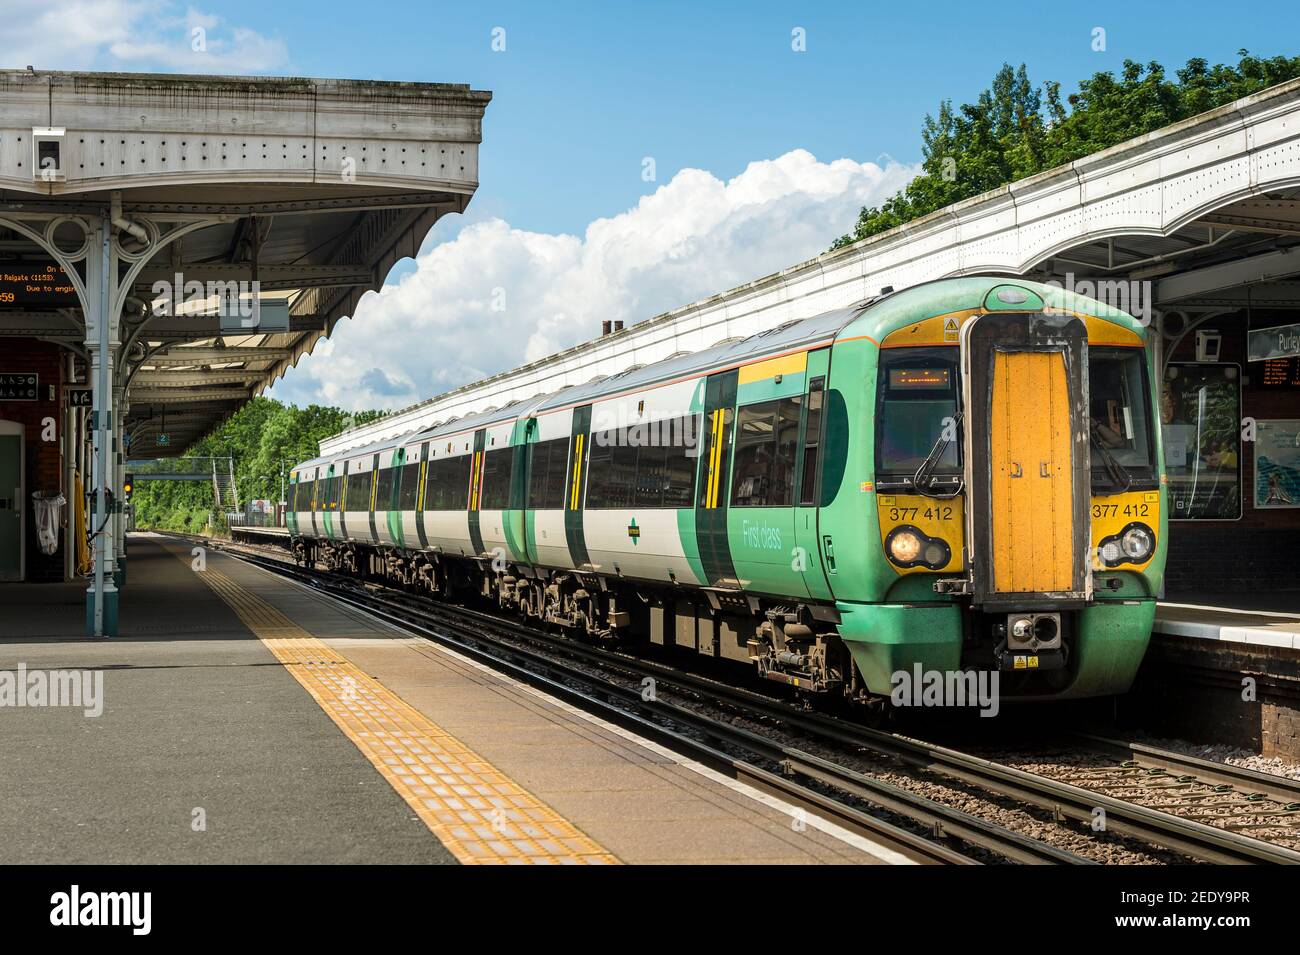 Class 377 passenger train in Southern livery at Purley railway station, England. Stock Photo